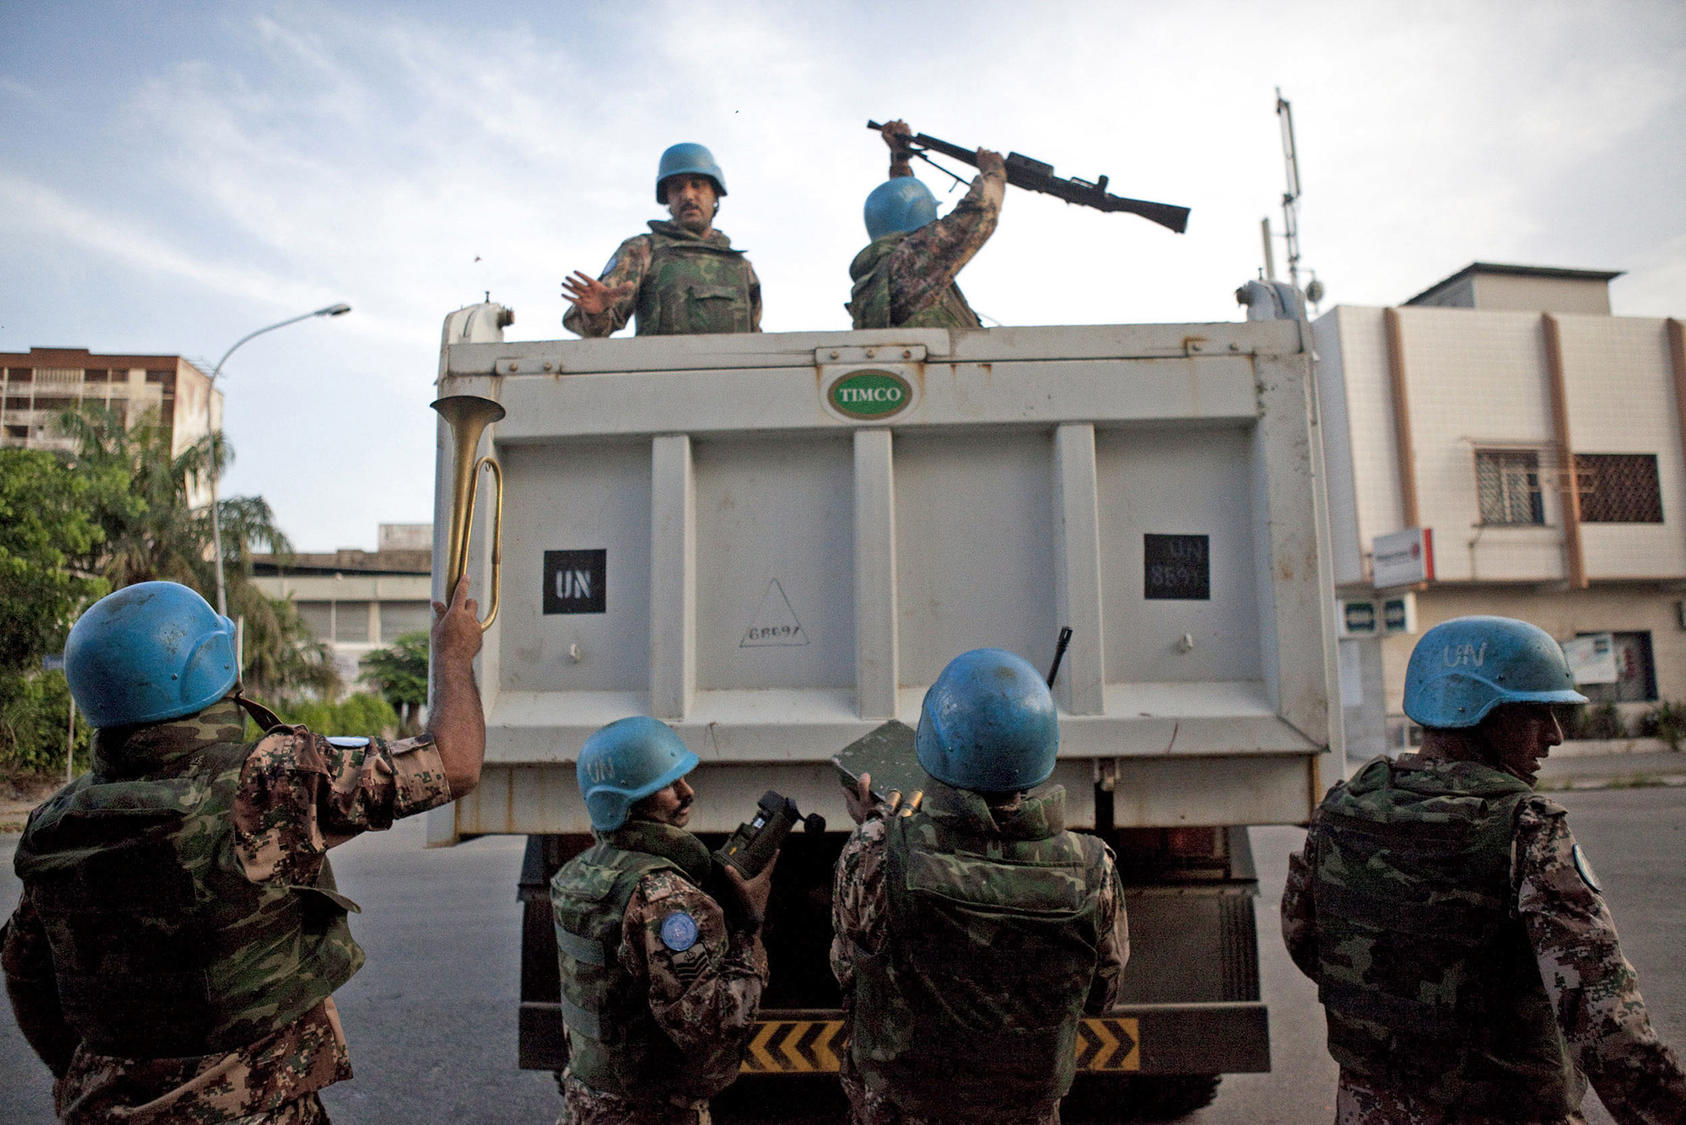 UN peacekeeping troops collect weapons and other materials from the army headquarters of Côte d’Ivoire’s strongman Laurent Gbagbo in April 2011. (Photo by Jane Hahn/AP)